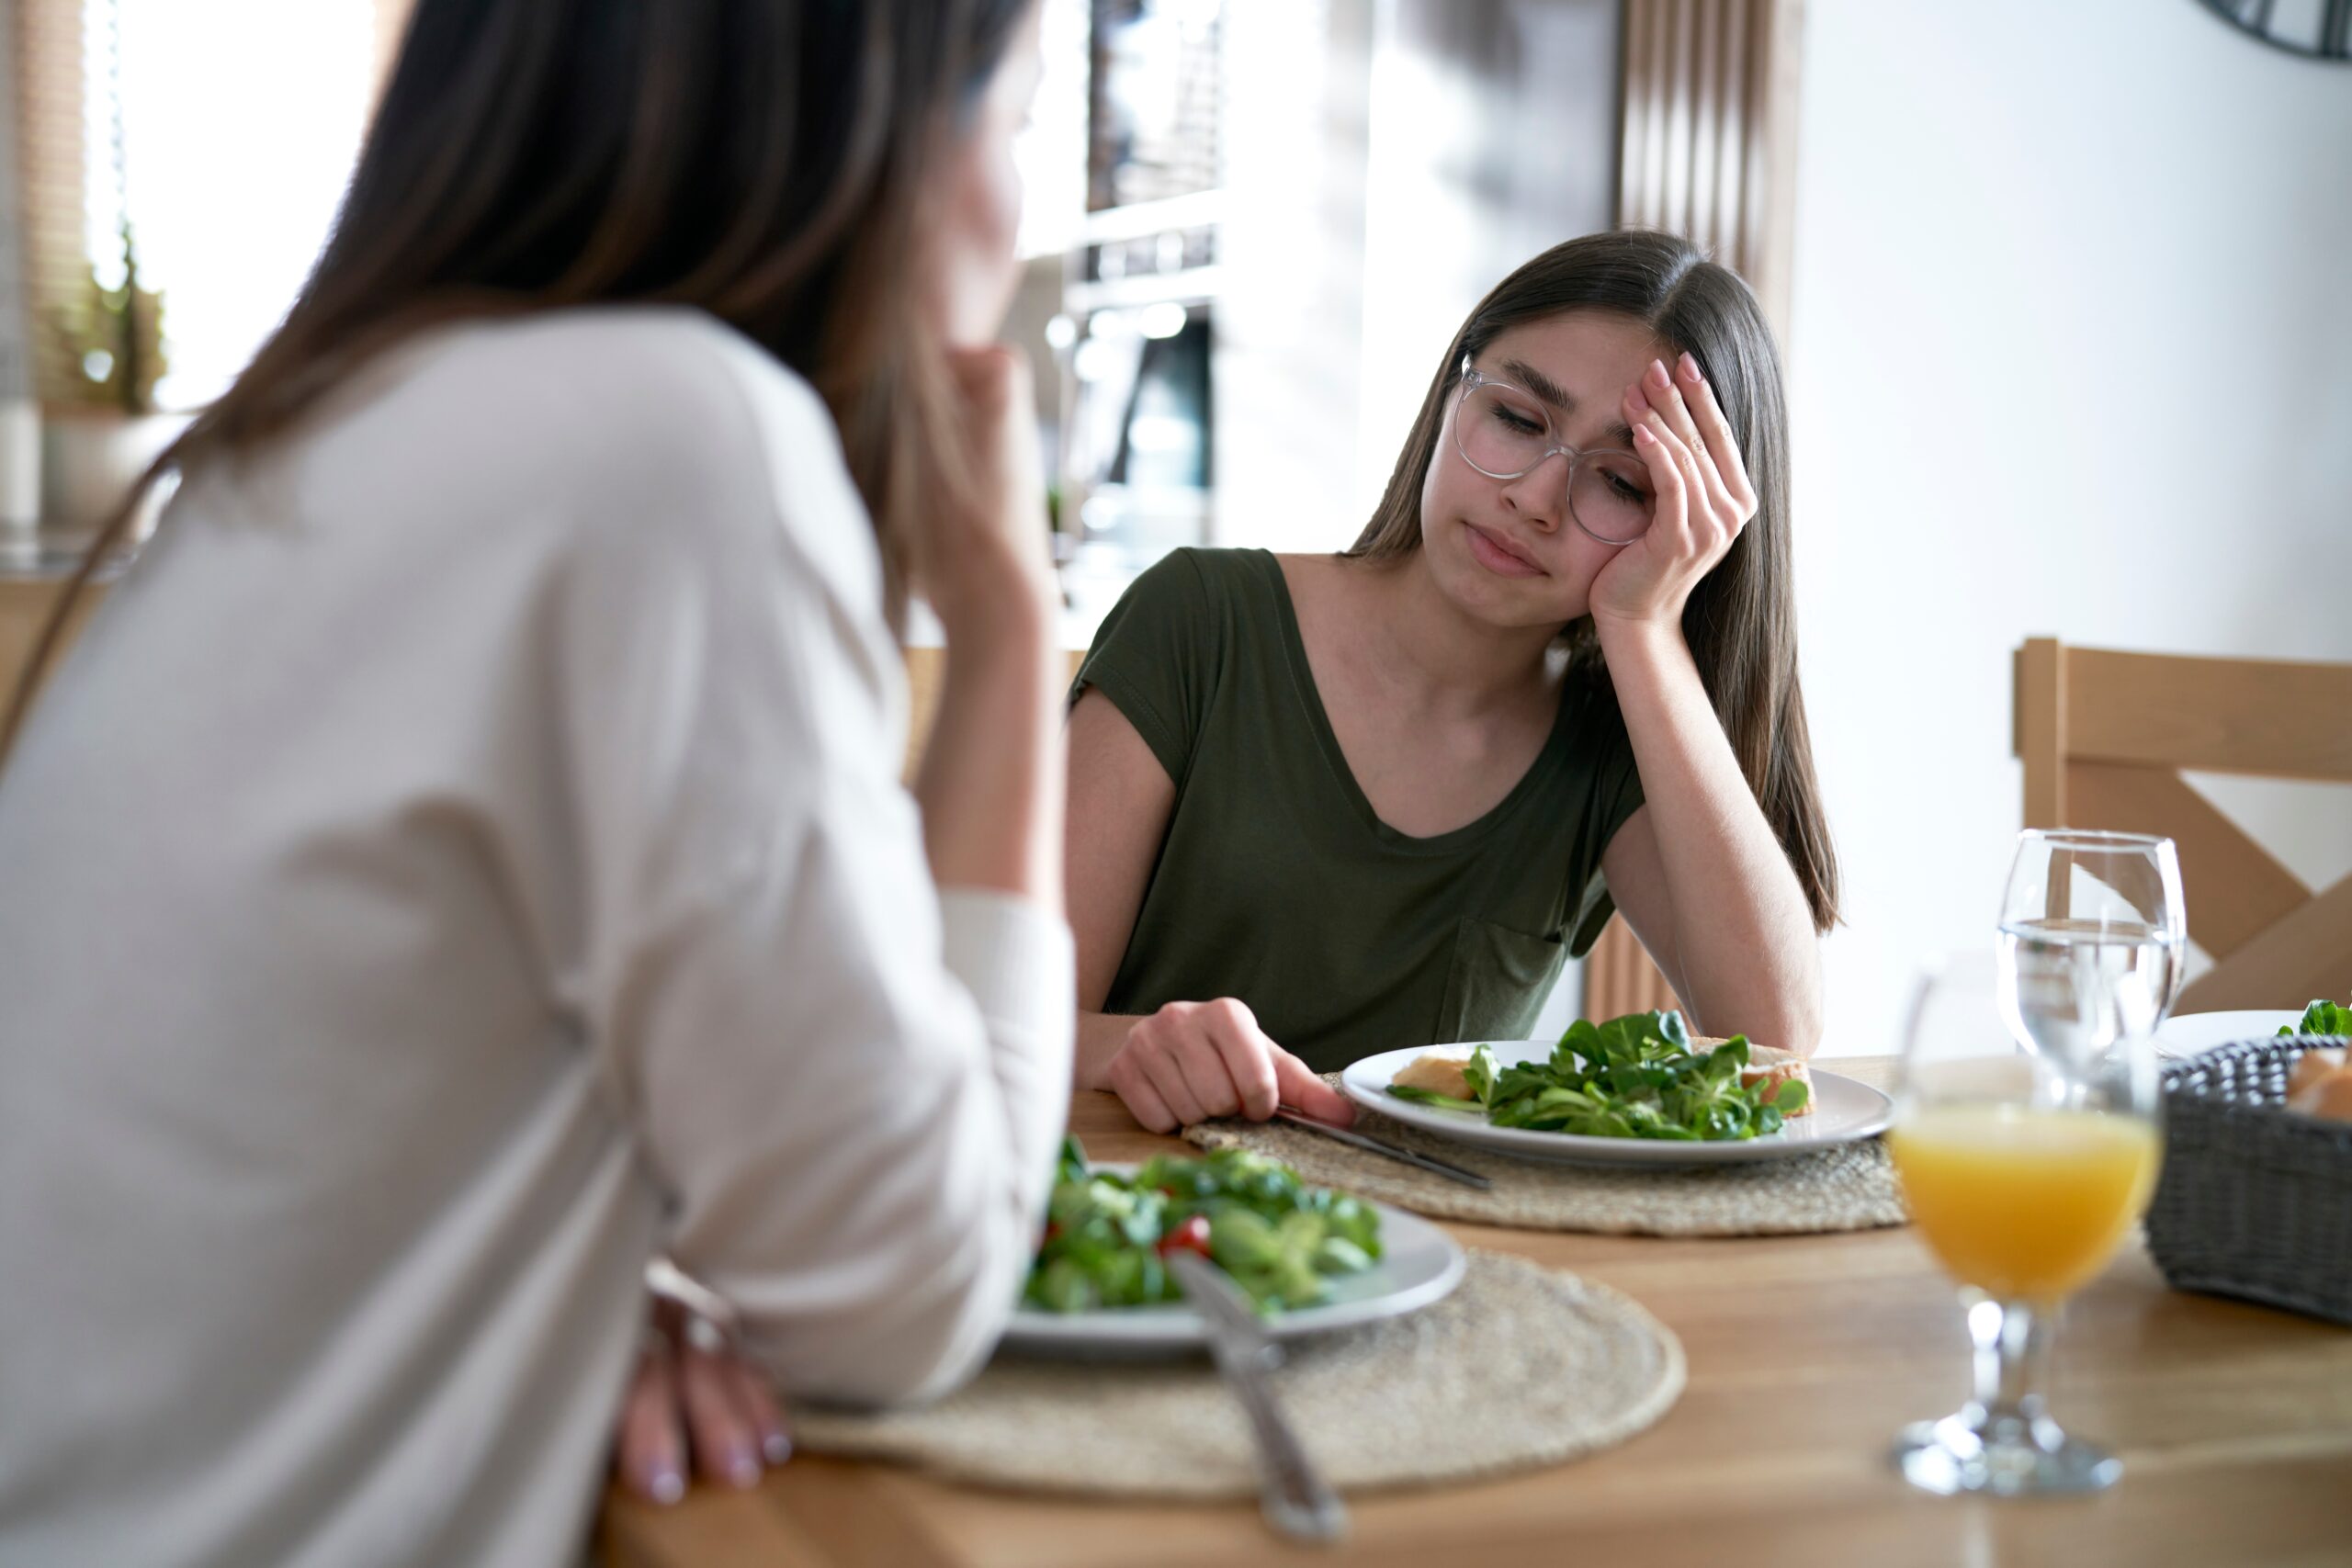 Mother supporting daughter with eating disorder during meal, highlighting the importance of family involvement in treatment.